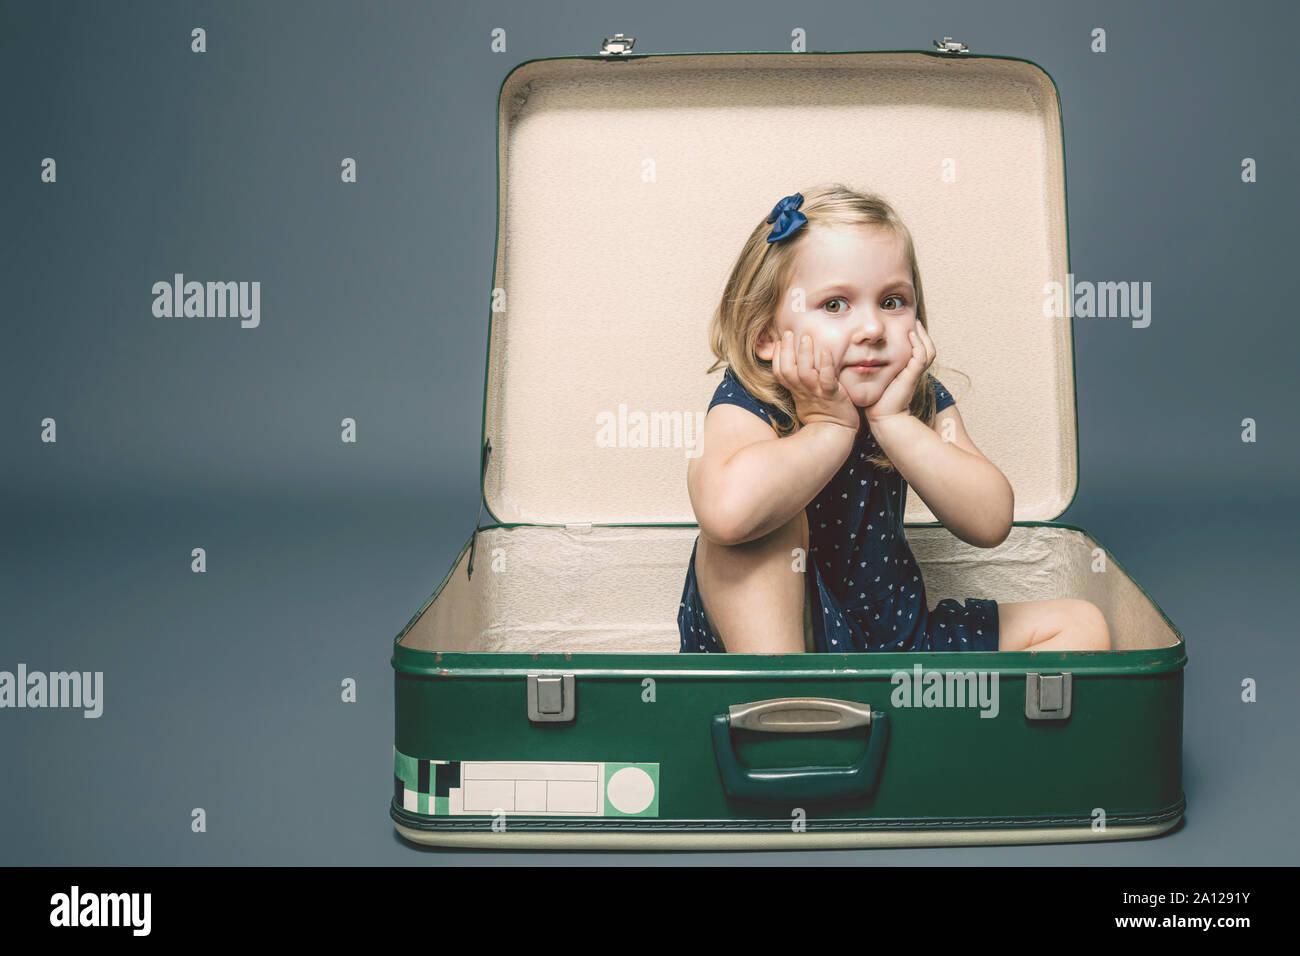 3 year old Caucasian girl with dreamy expression sitting inside a vintage suitcase. Studio shot. Stock Photo